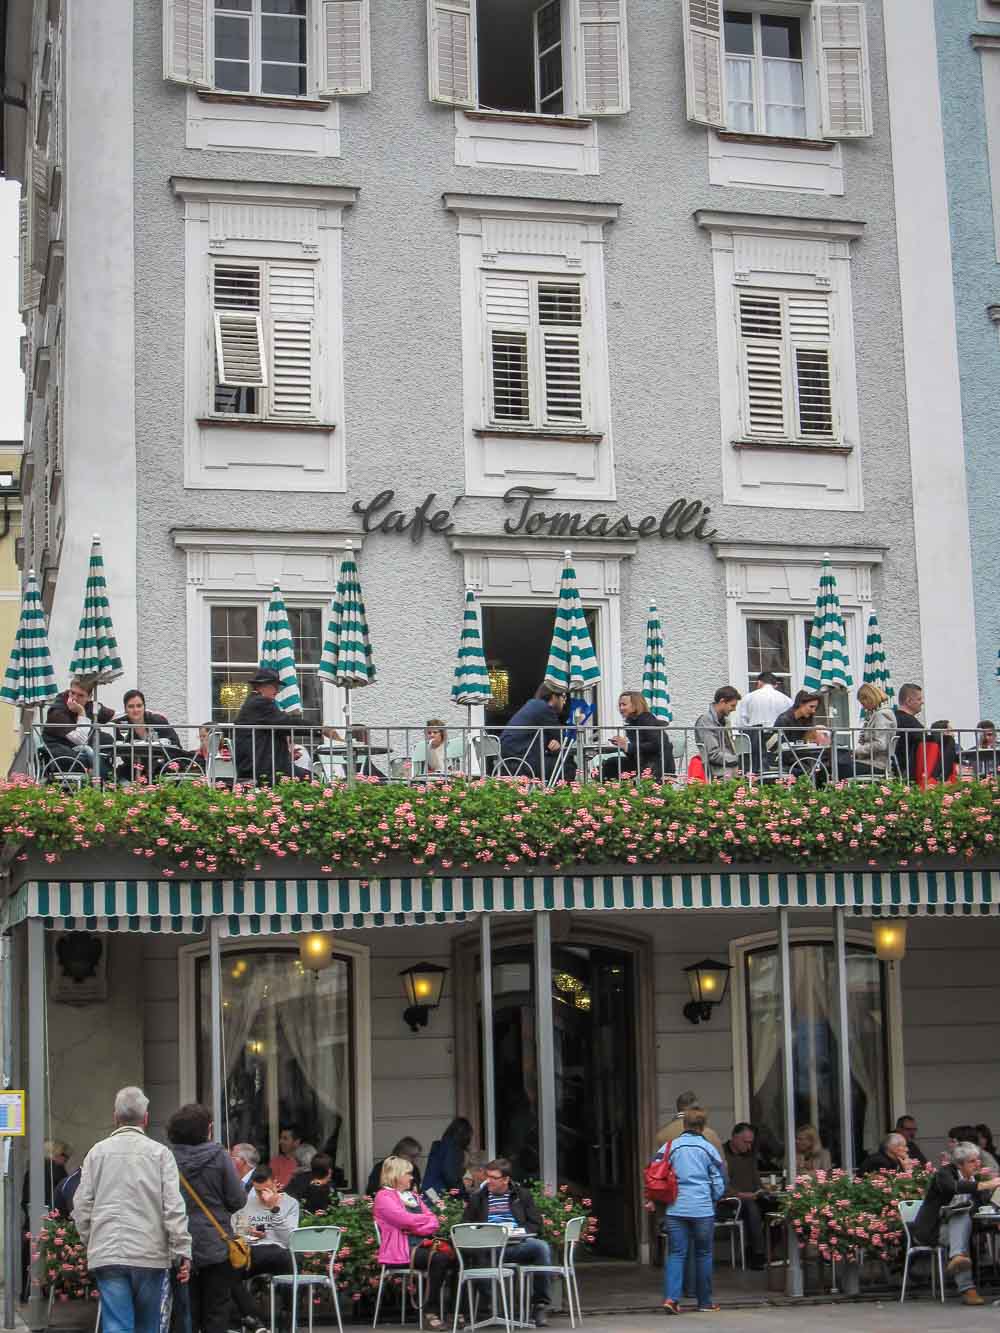 Cafe Tomaselli-3 Meals: Where to eat in Salzburg, Austria www.casualtravelist.com